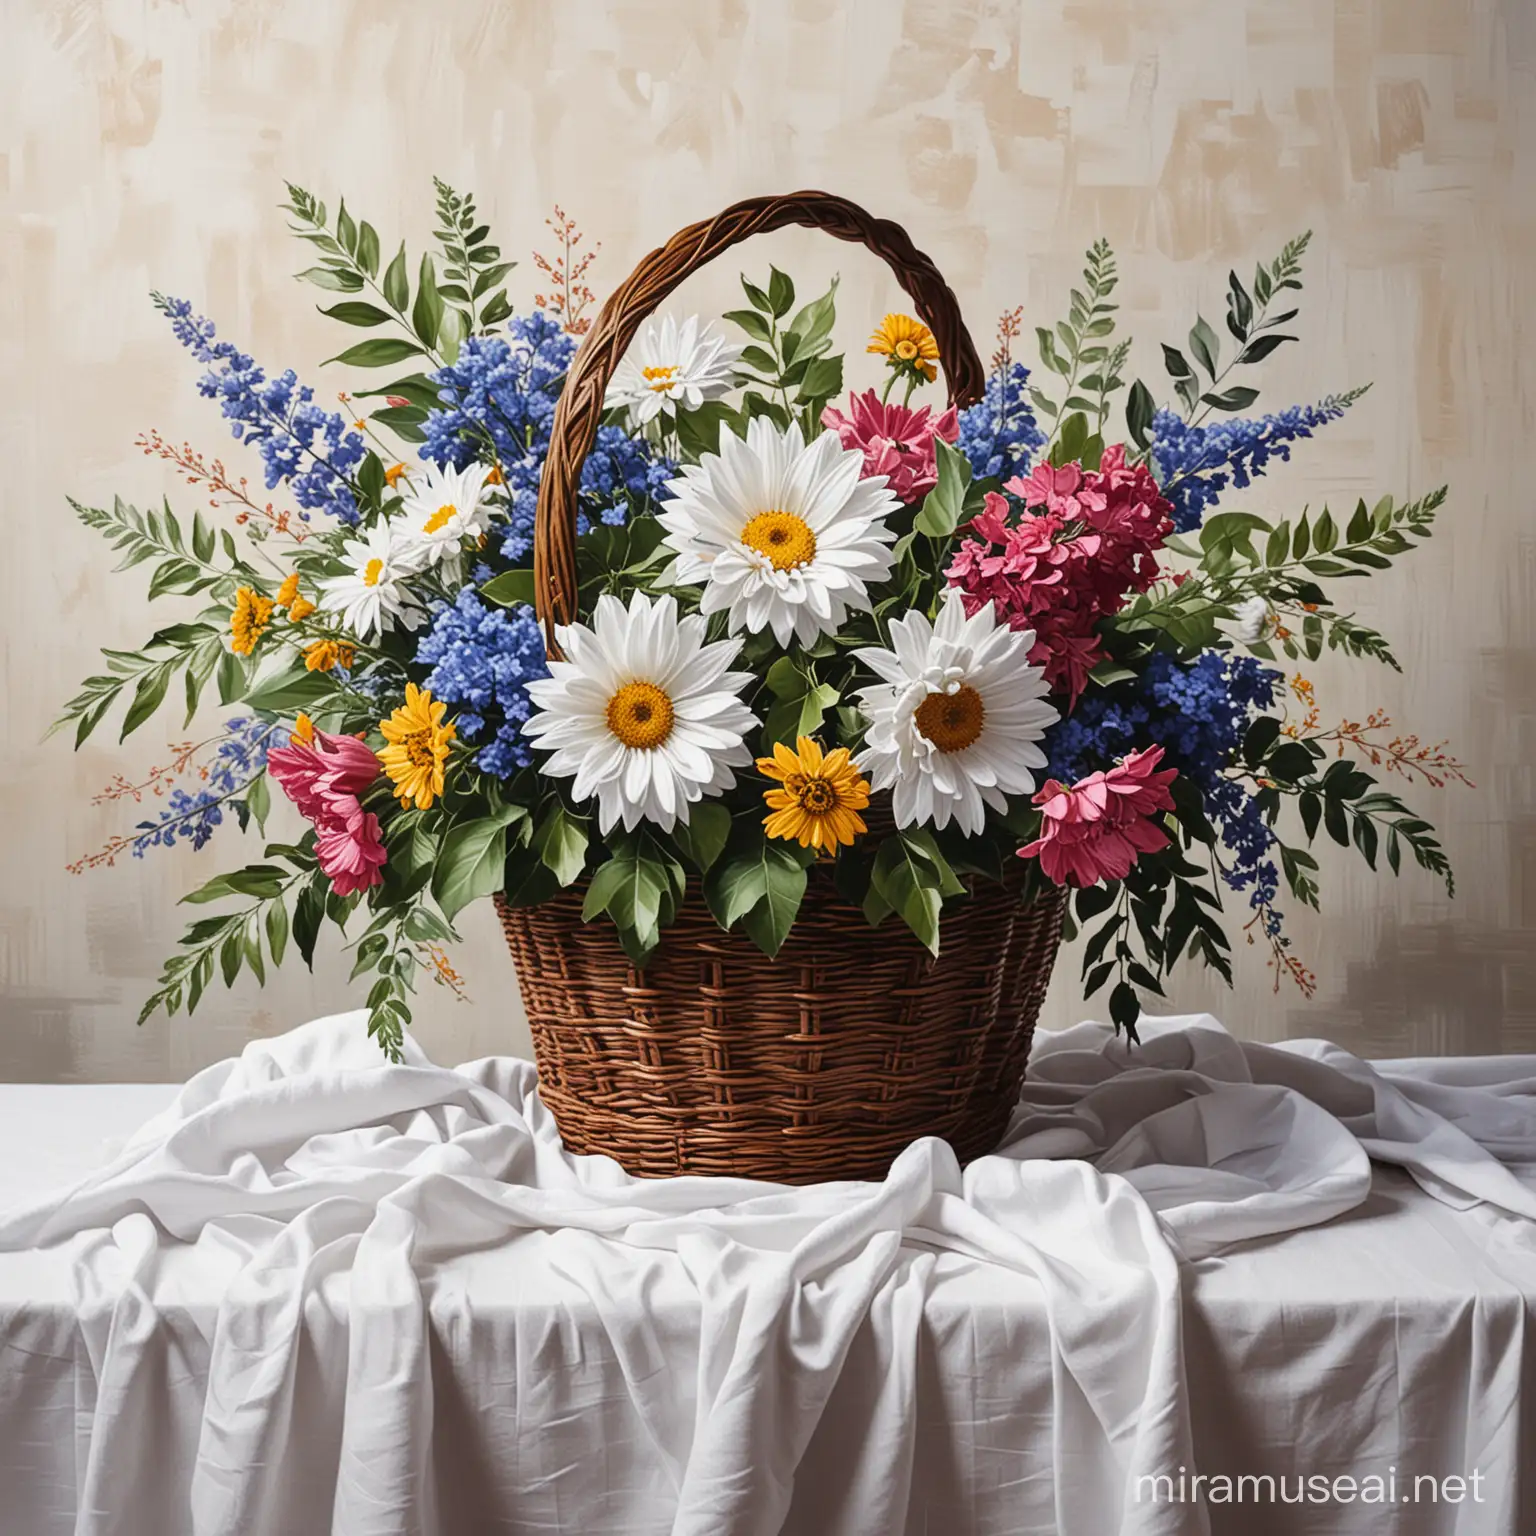 Vibrant Acrylic Flower Basket Painting on Tablecloth Bold Brush Strokes and High Contrast